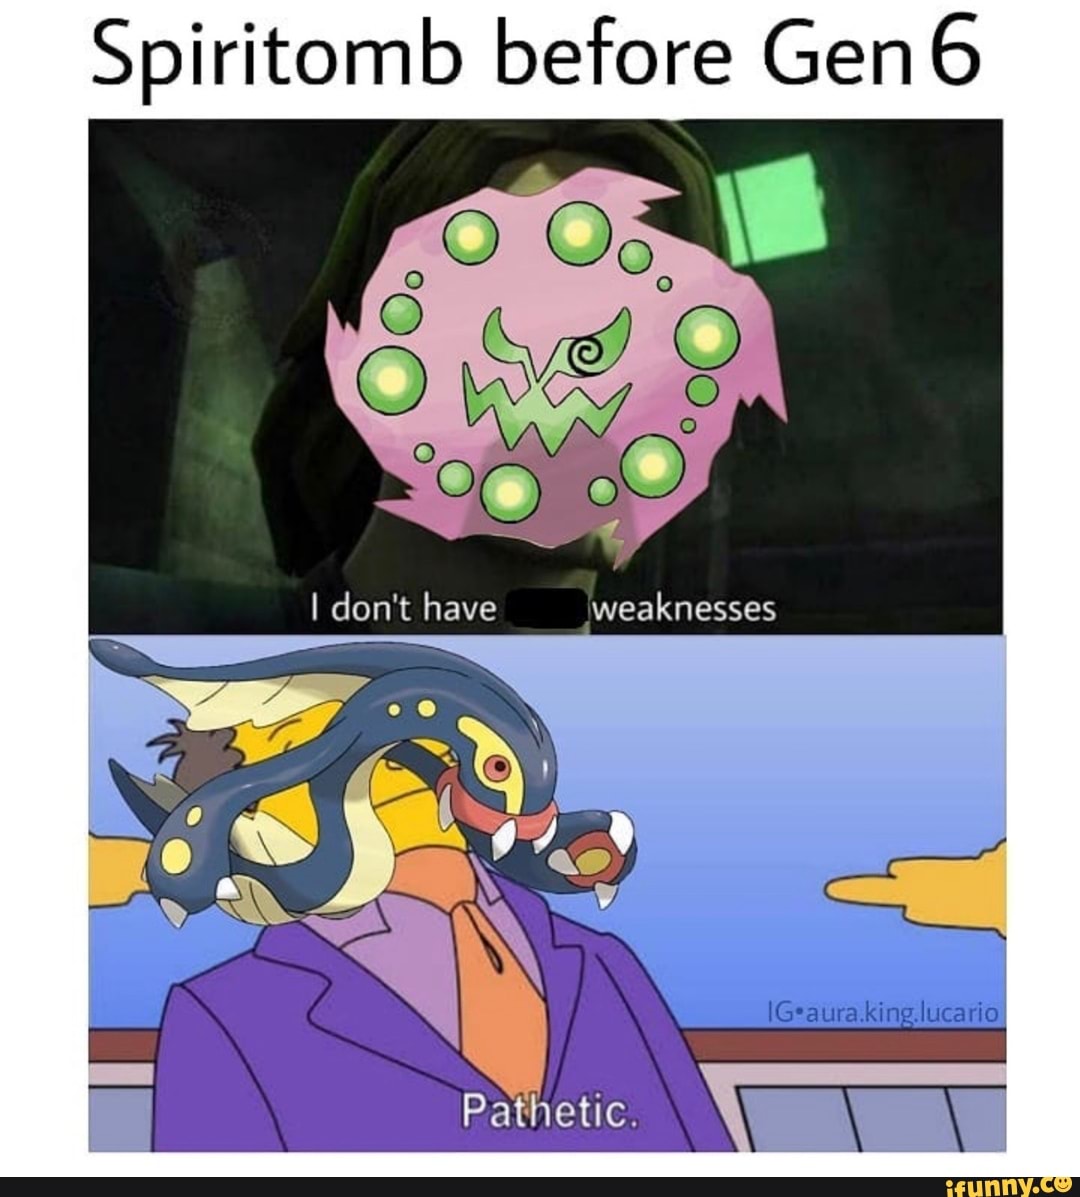 Spiritomb before Gen I don't have weaknesses - iFunny